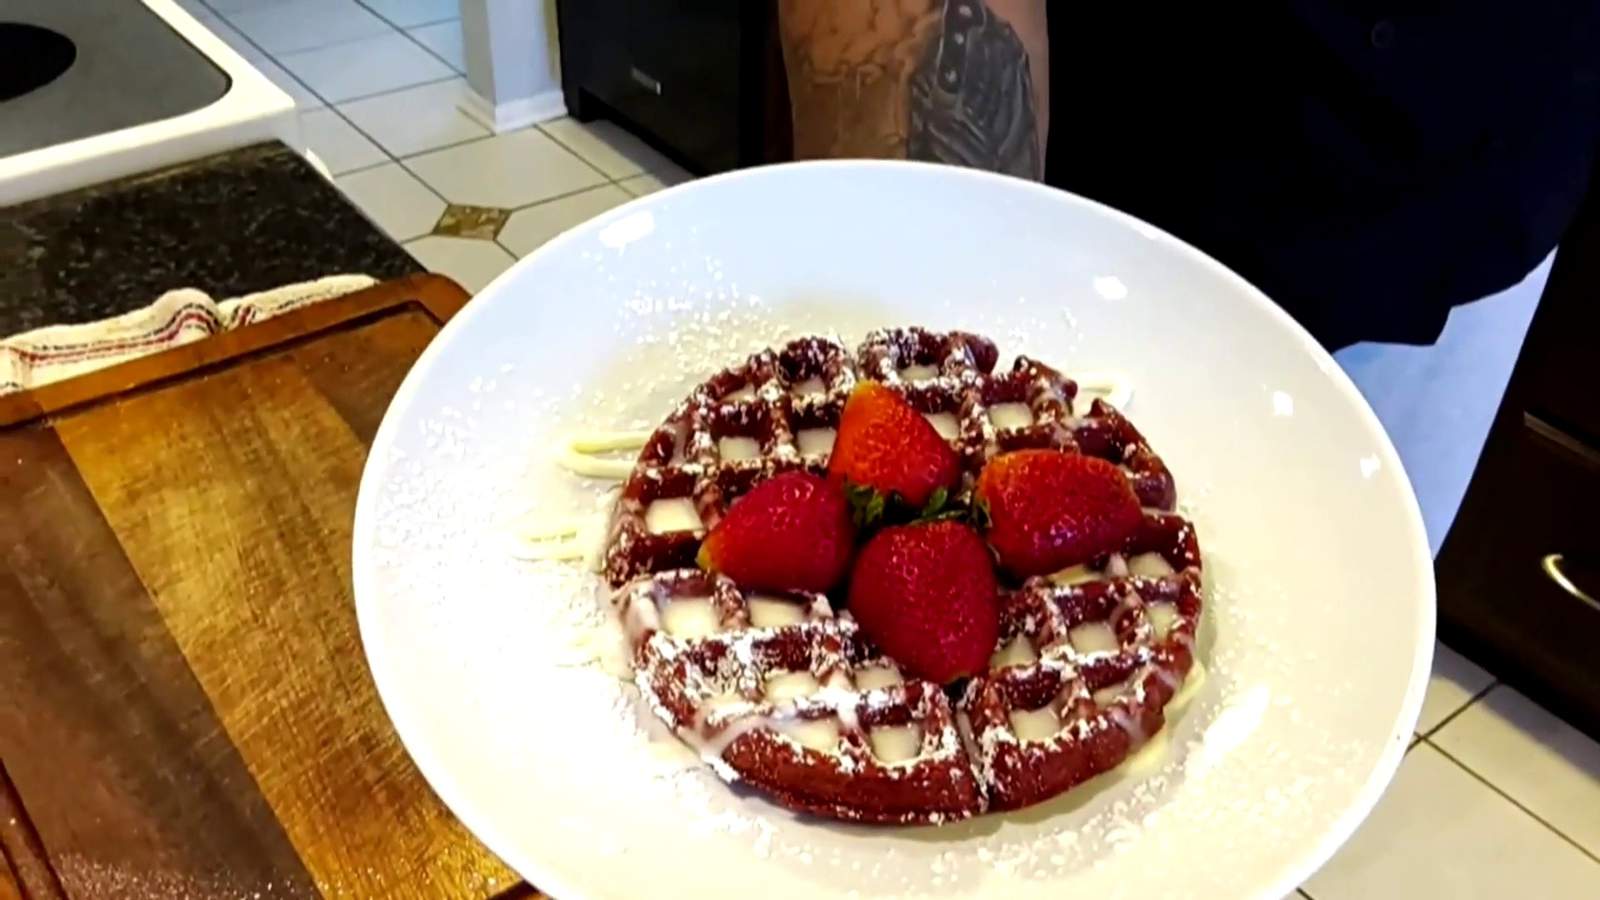 Tasty Tuesday Home Edition: Red velvet waffles